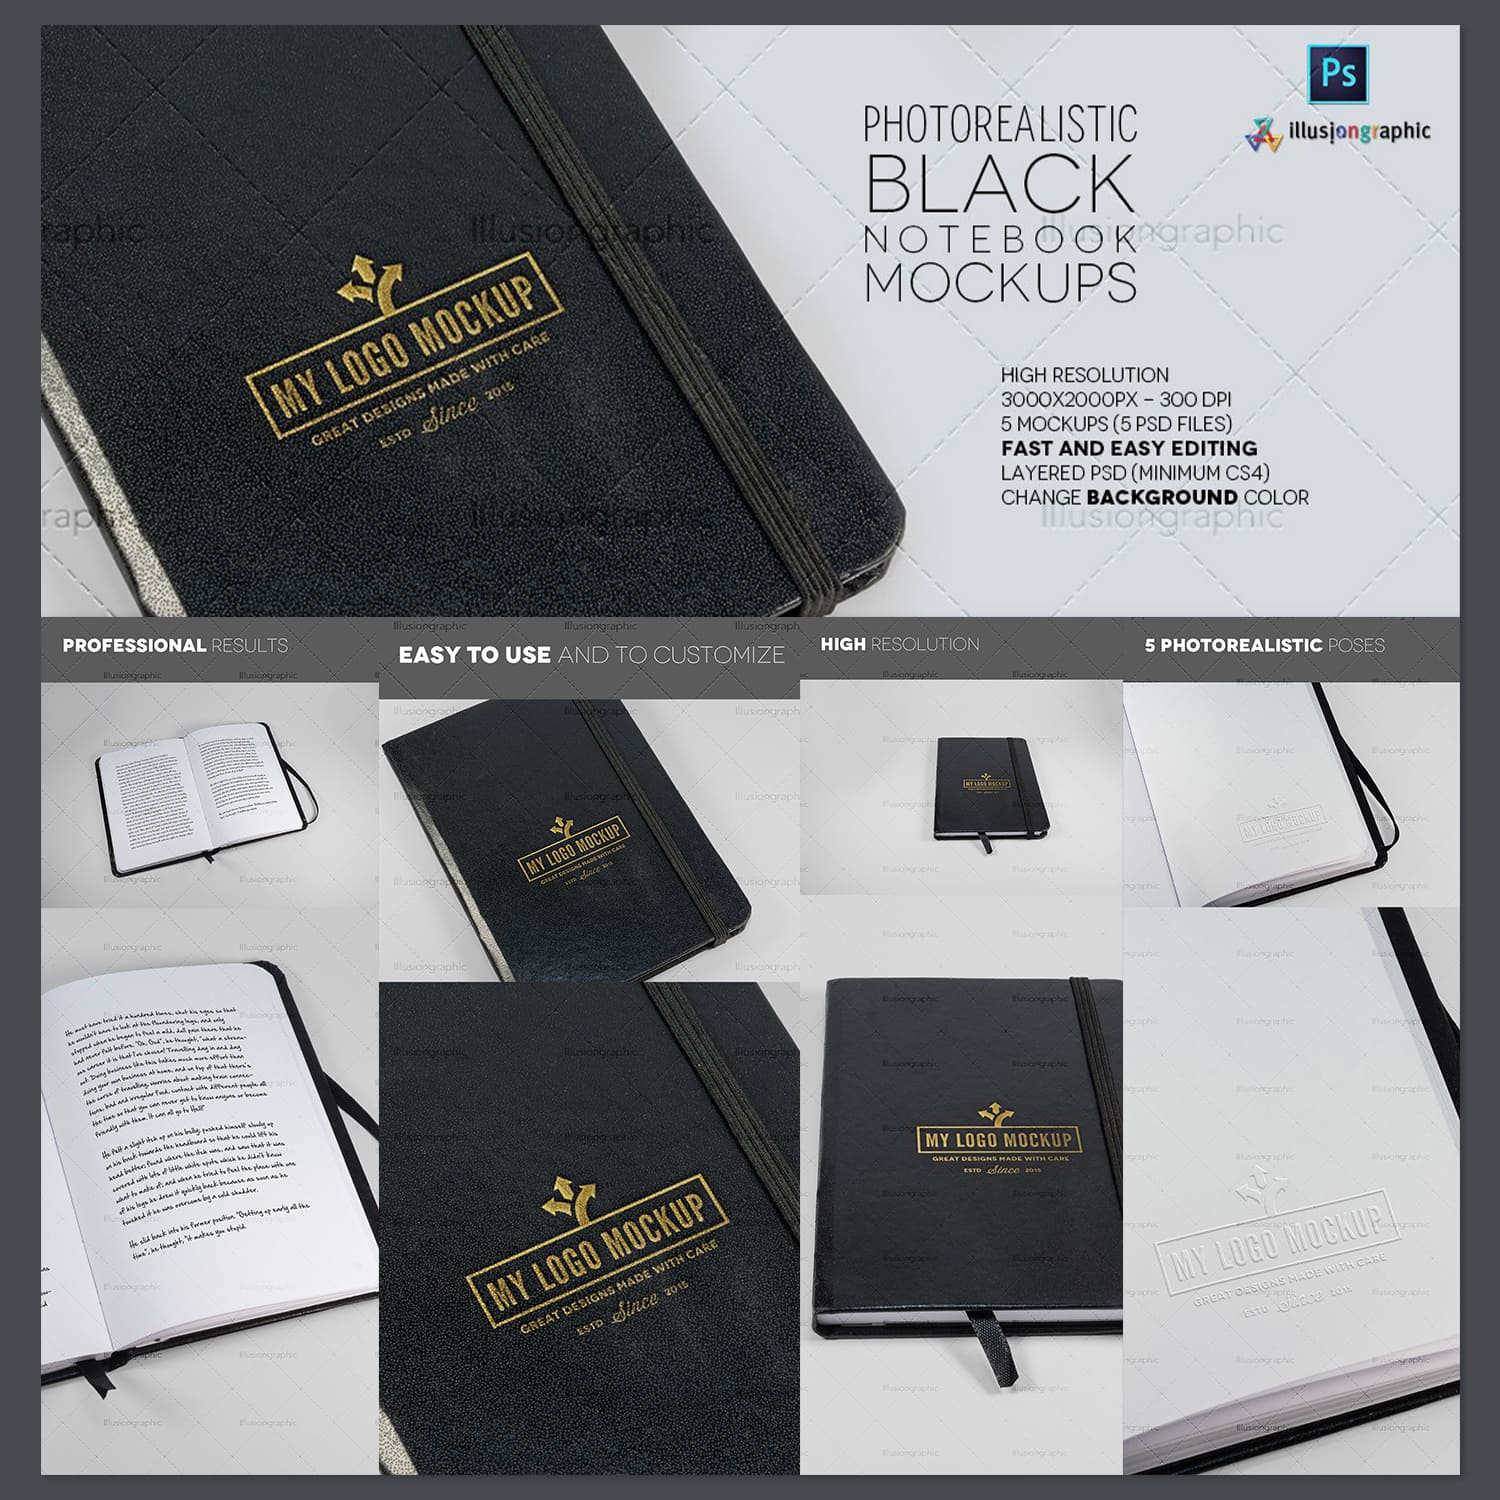 Pack with images of notebooks with exquisite design.